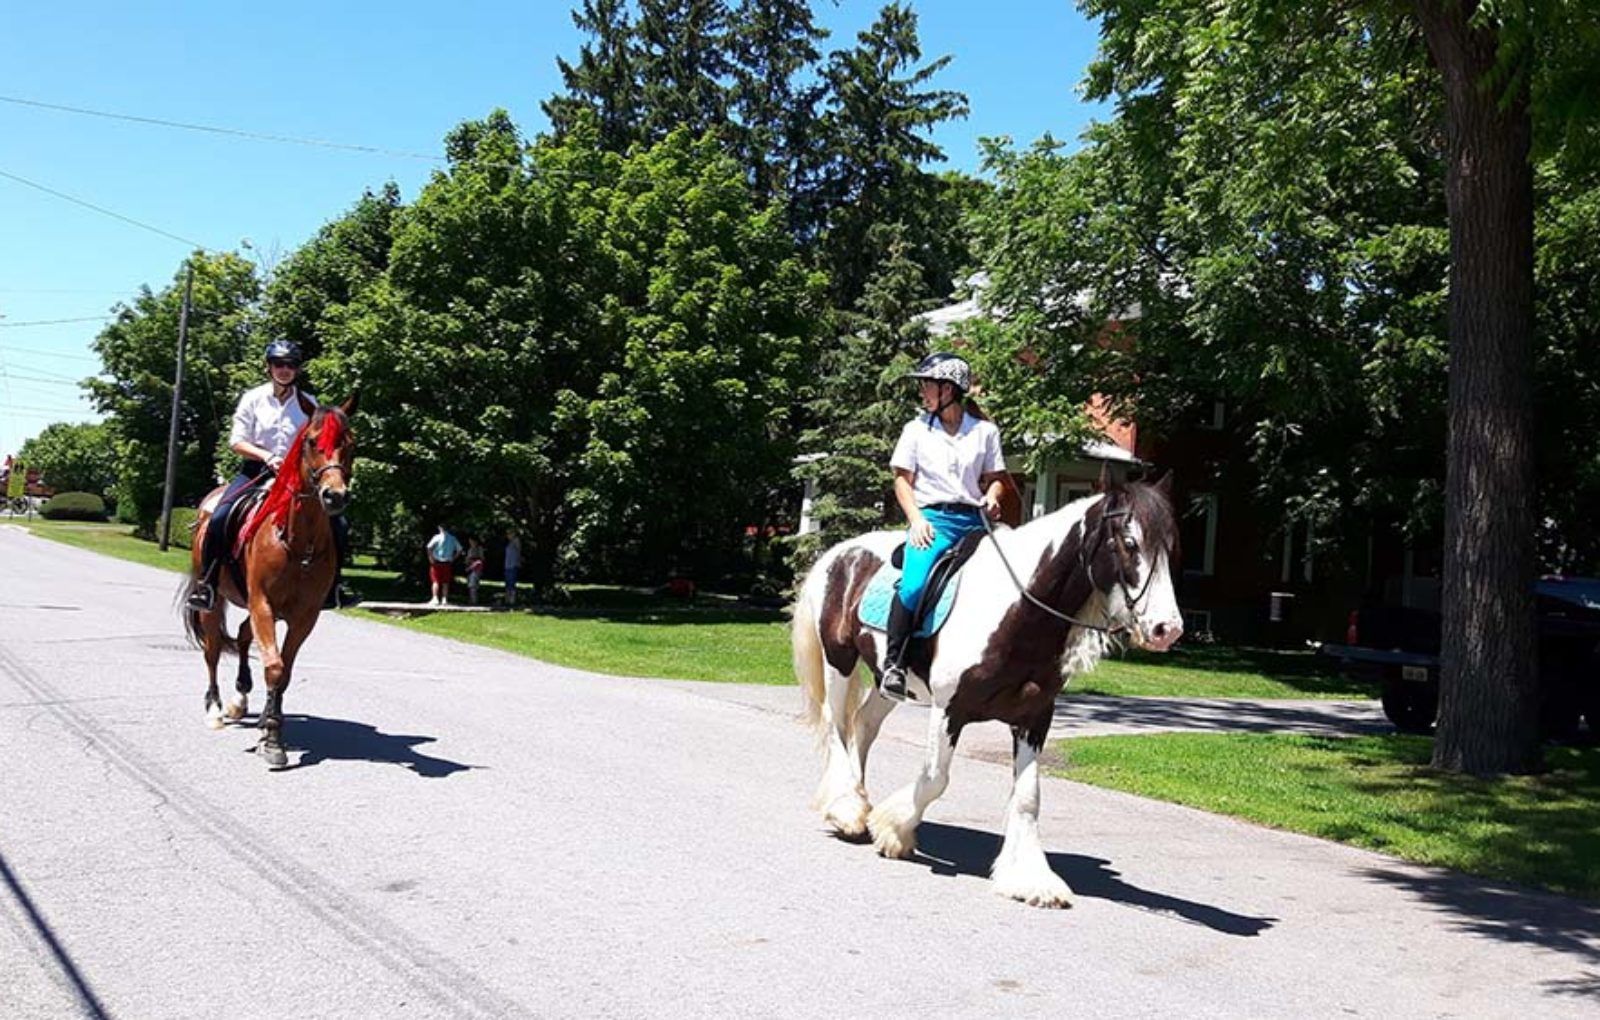 LS_July 10 2019 Horse and Buggy Parade (37)